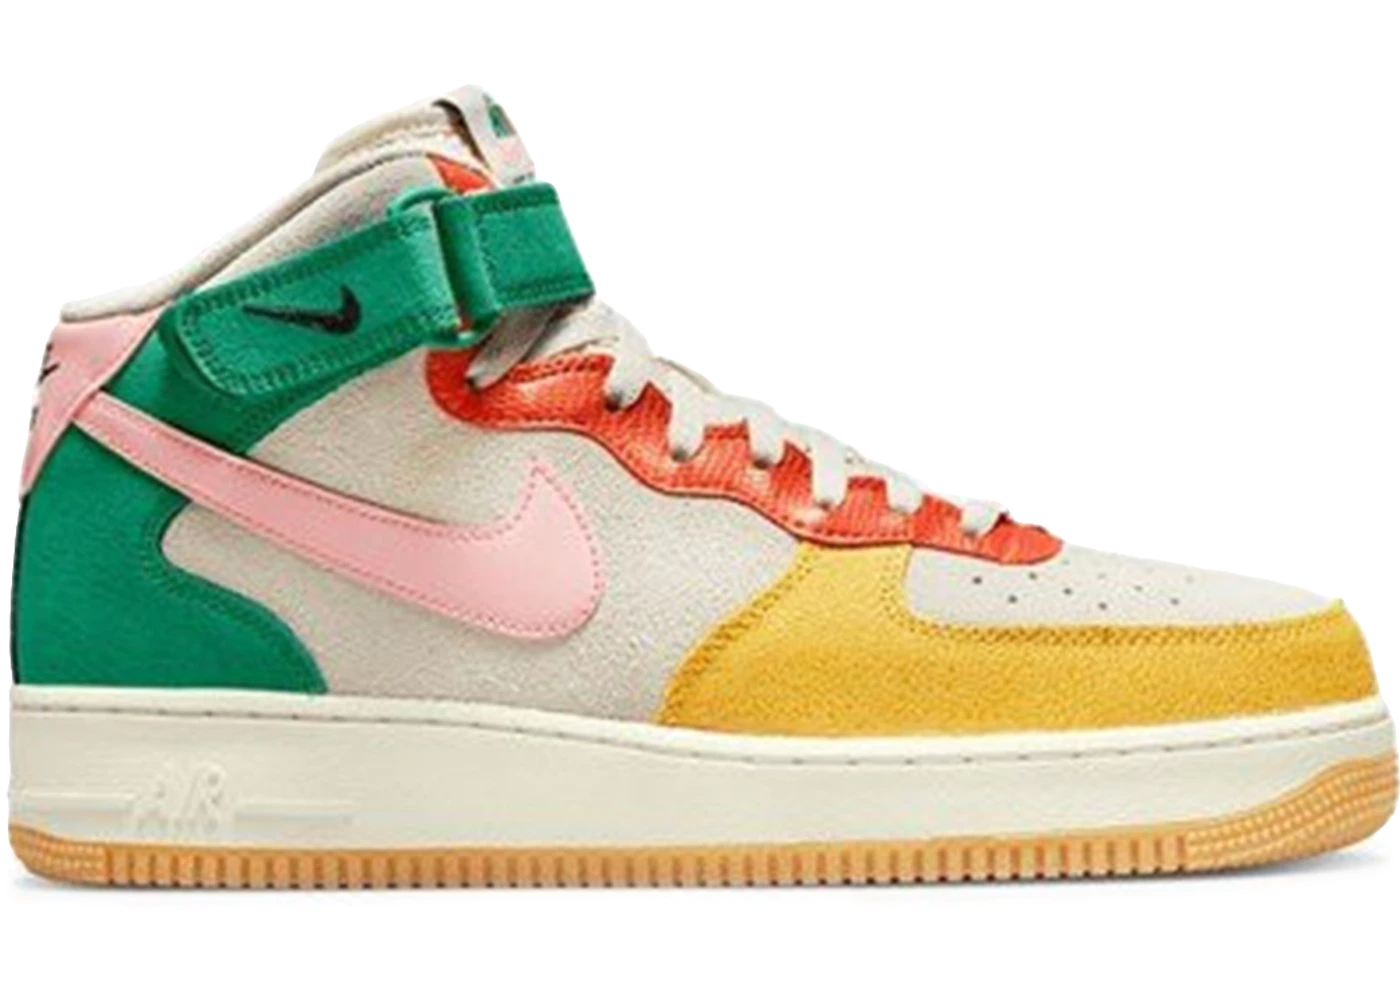 Now Available: Nike Air Force 1 Mid 